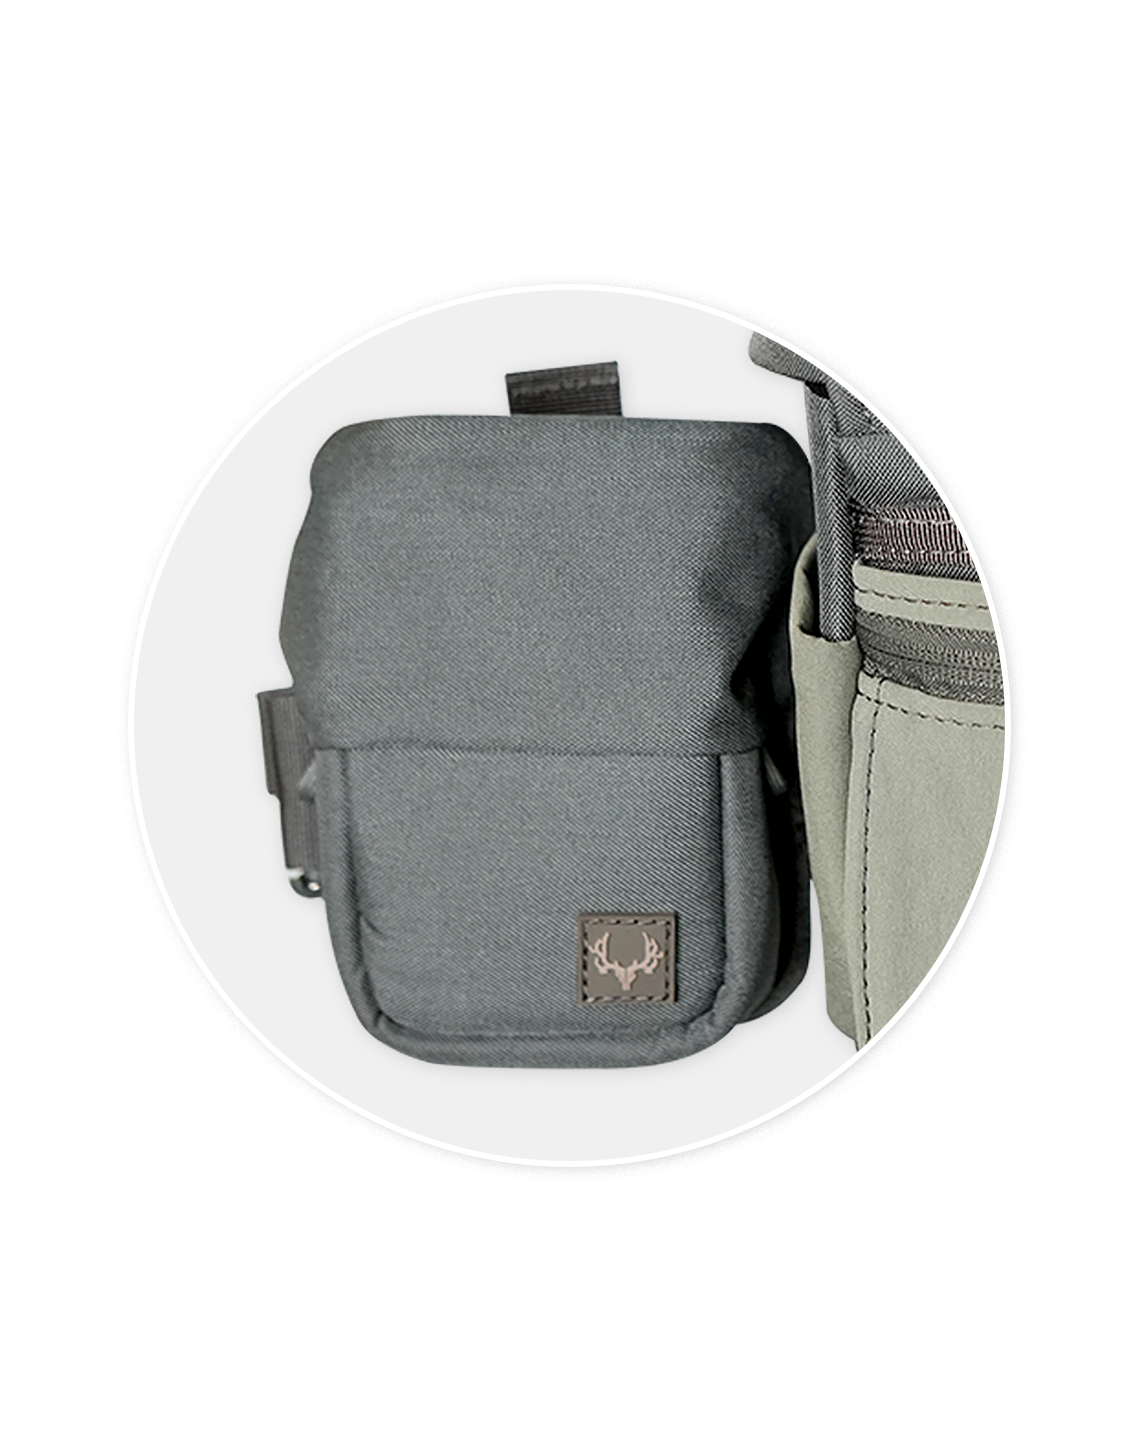 Wolf gray silent operation rangefinder pouch for outdoor use.